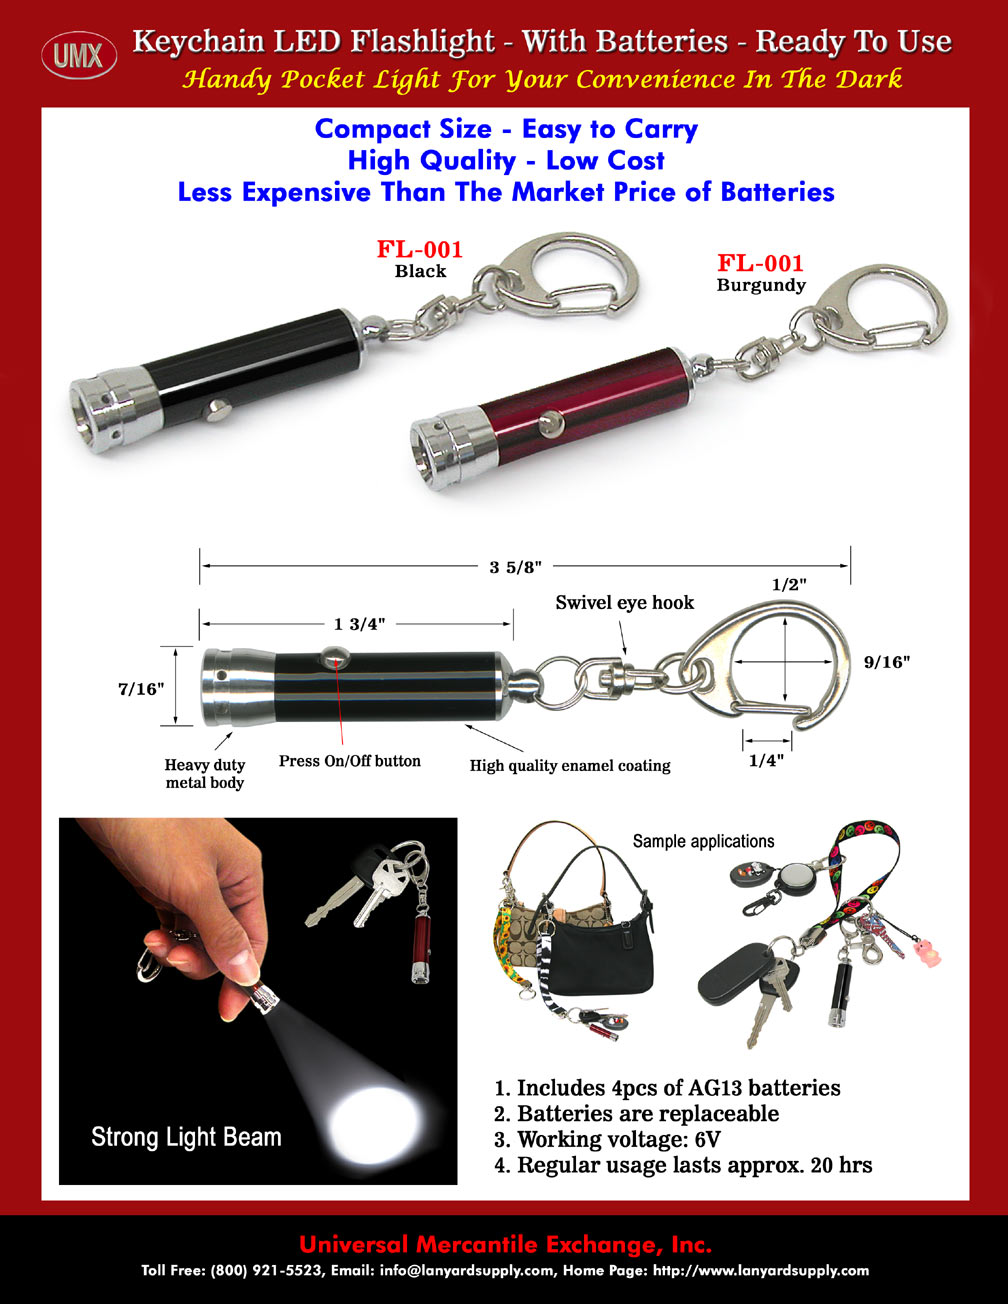 Compact Size Key Chain Flash Lights: A Handy Pocket Light For Keychains For Keychains - Easy to Carry.